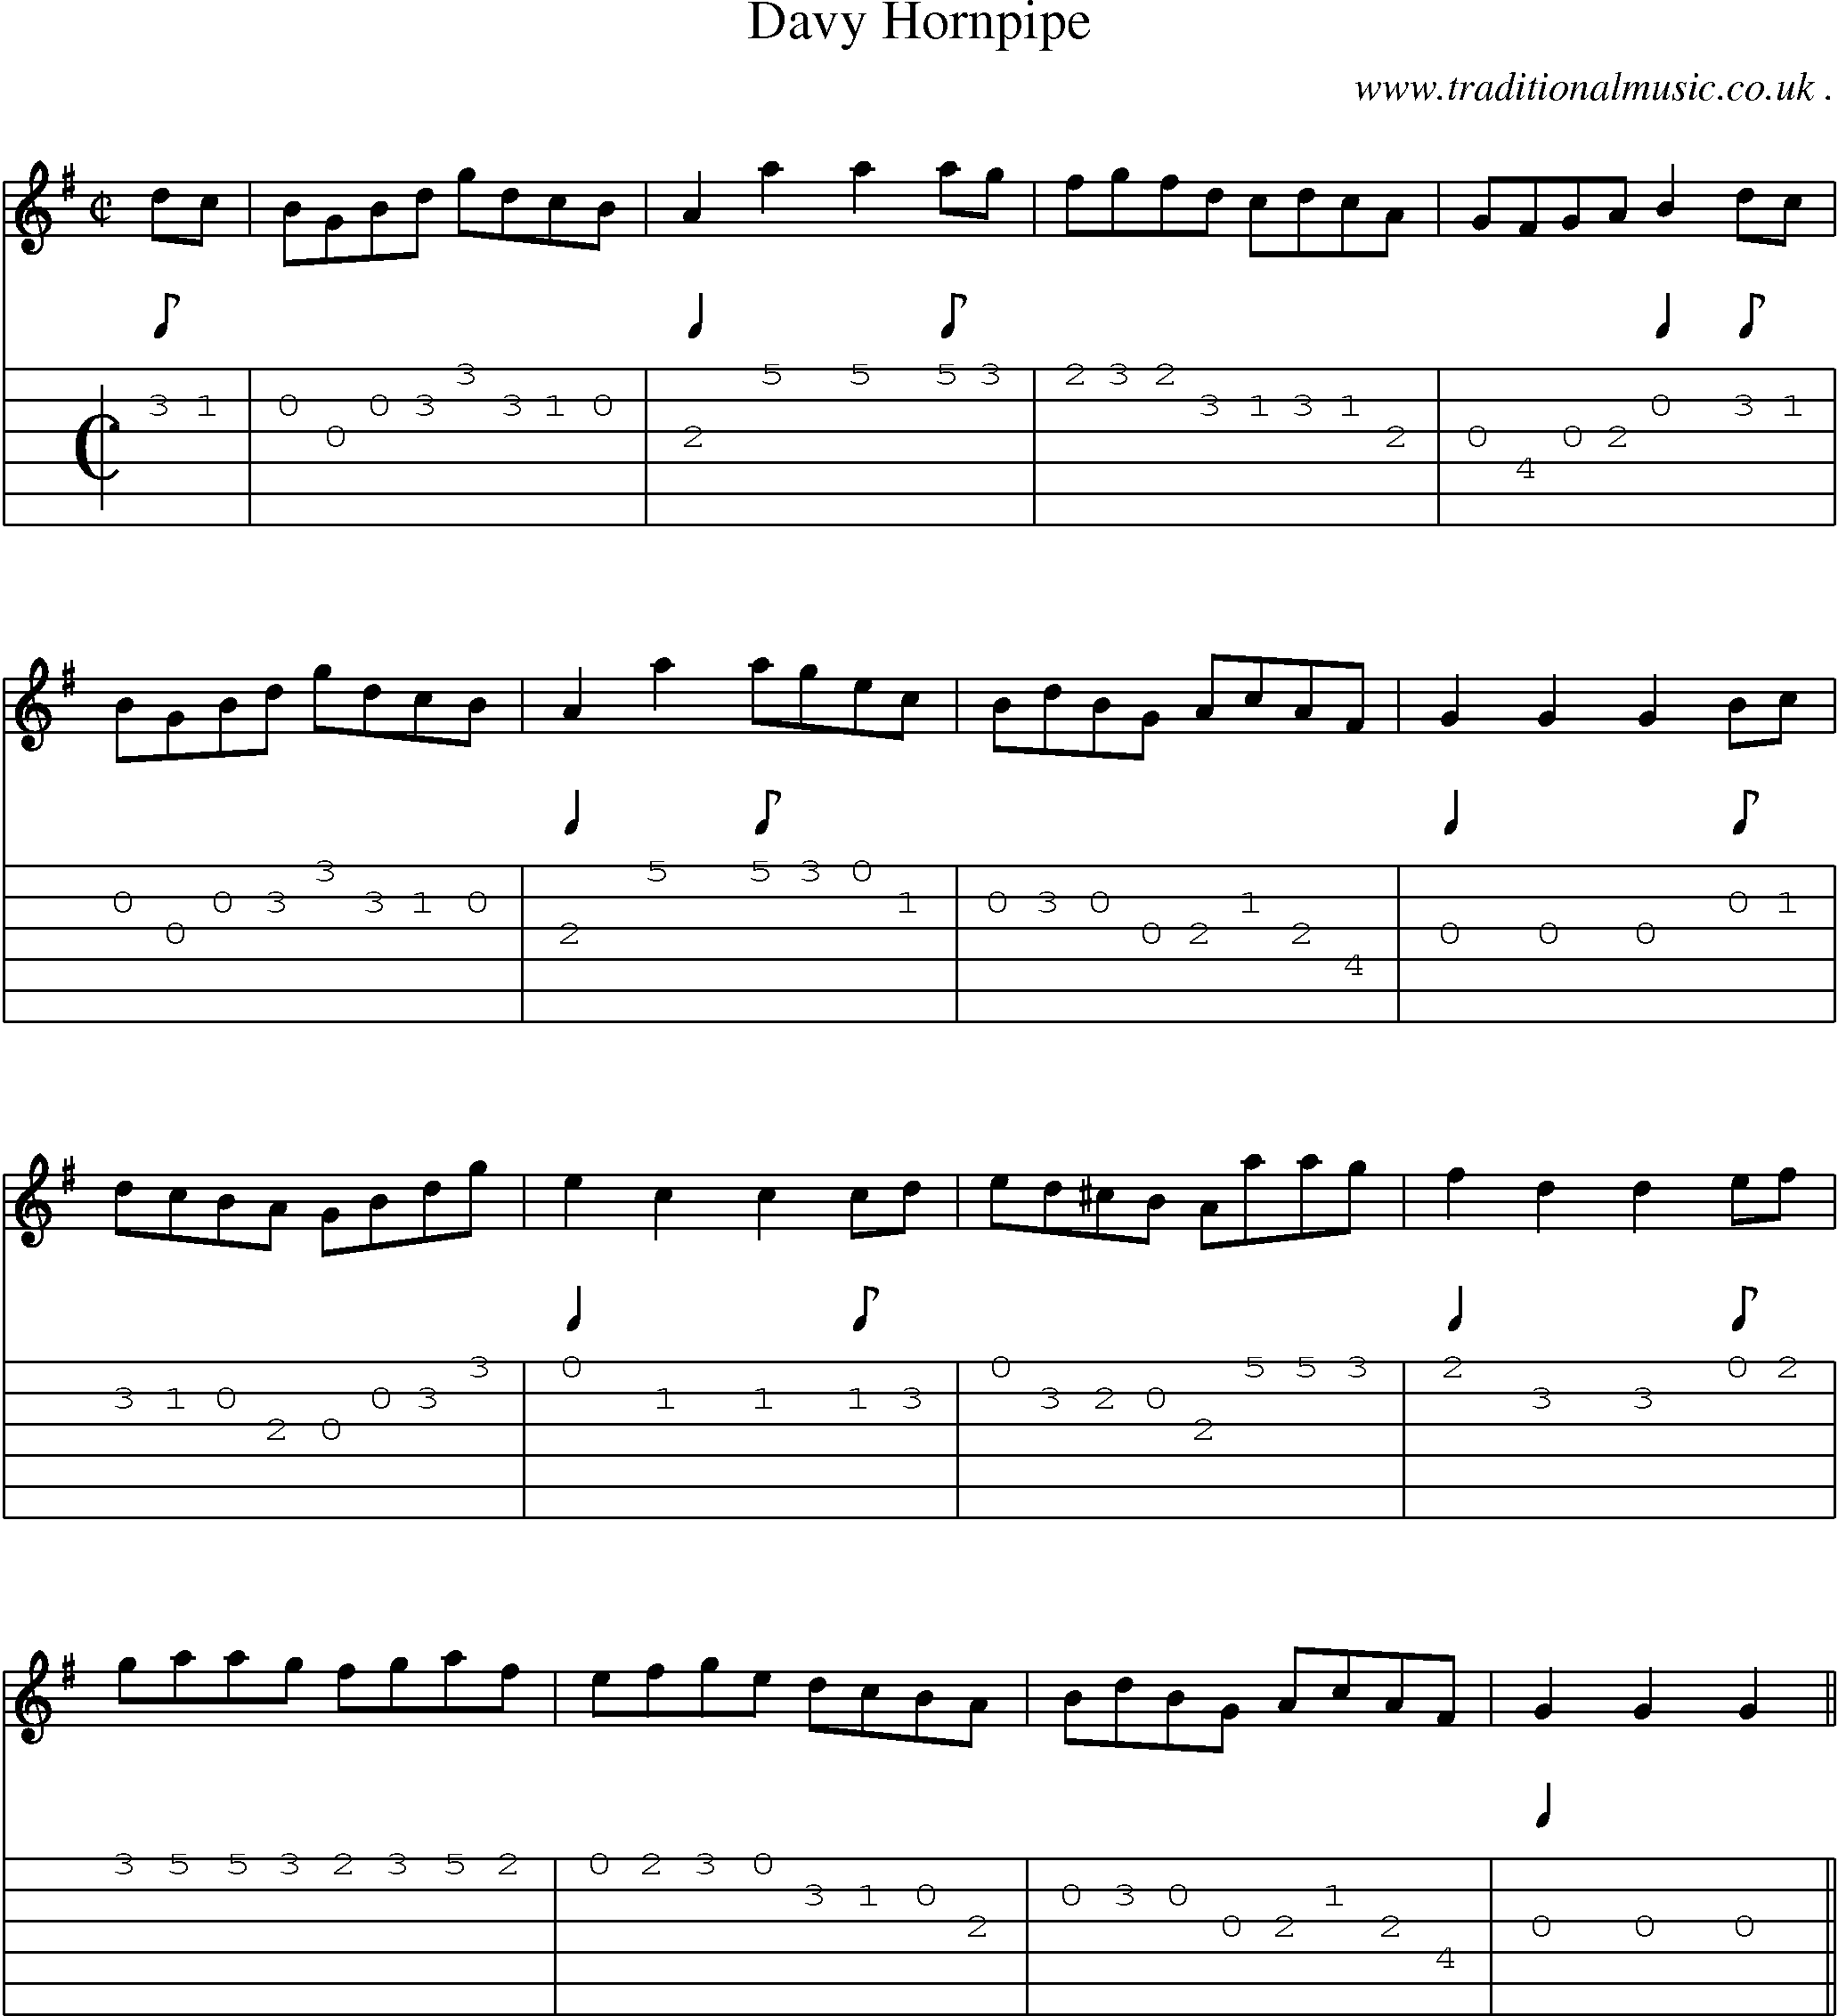 Sheet-Music and Guitar Tabs for Davy Hornpipe